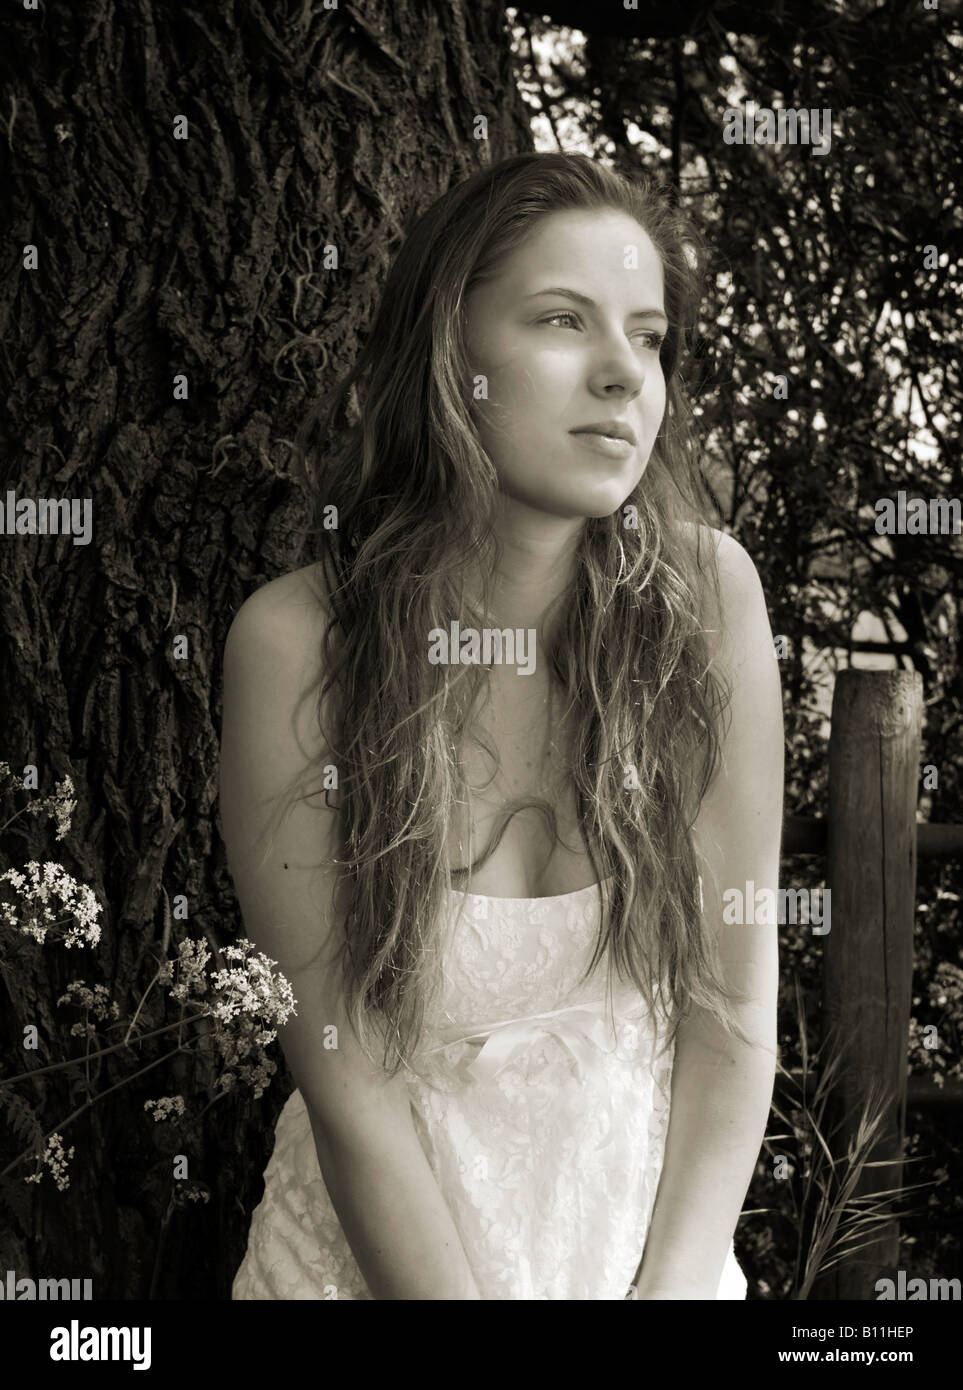 A teenage girl in a field wearing a white dress poses for the camera Stock Photo